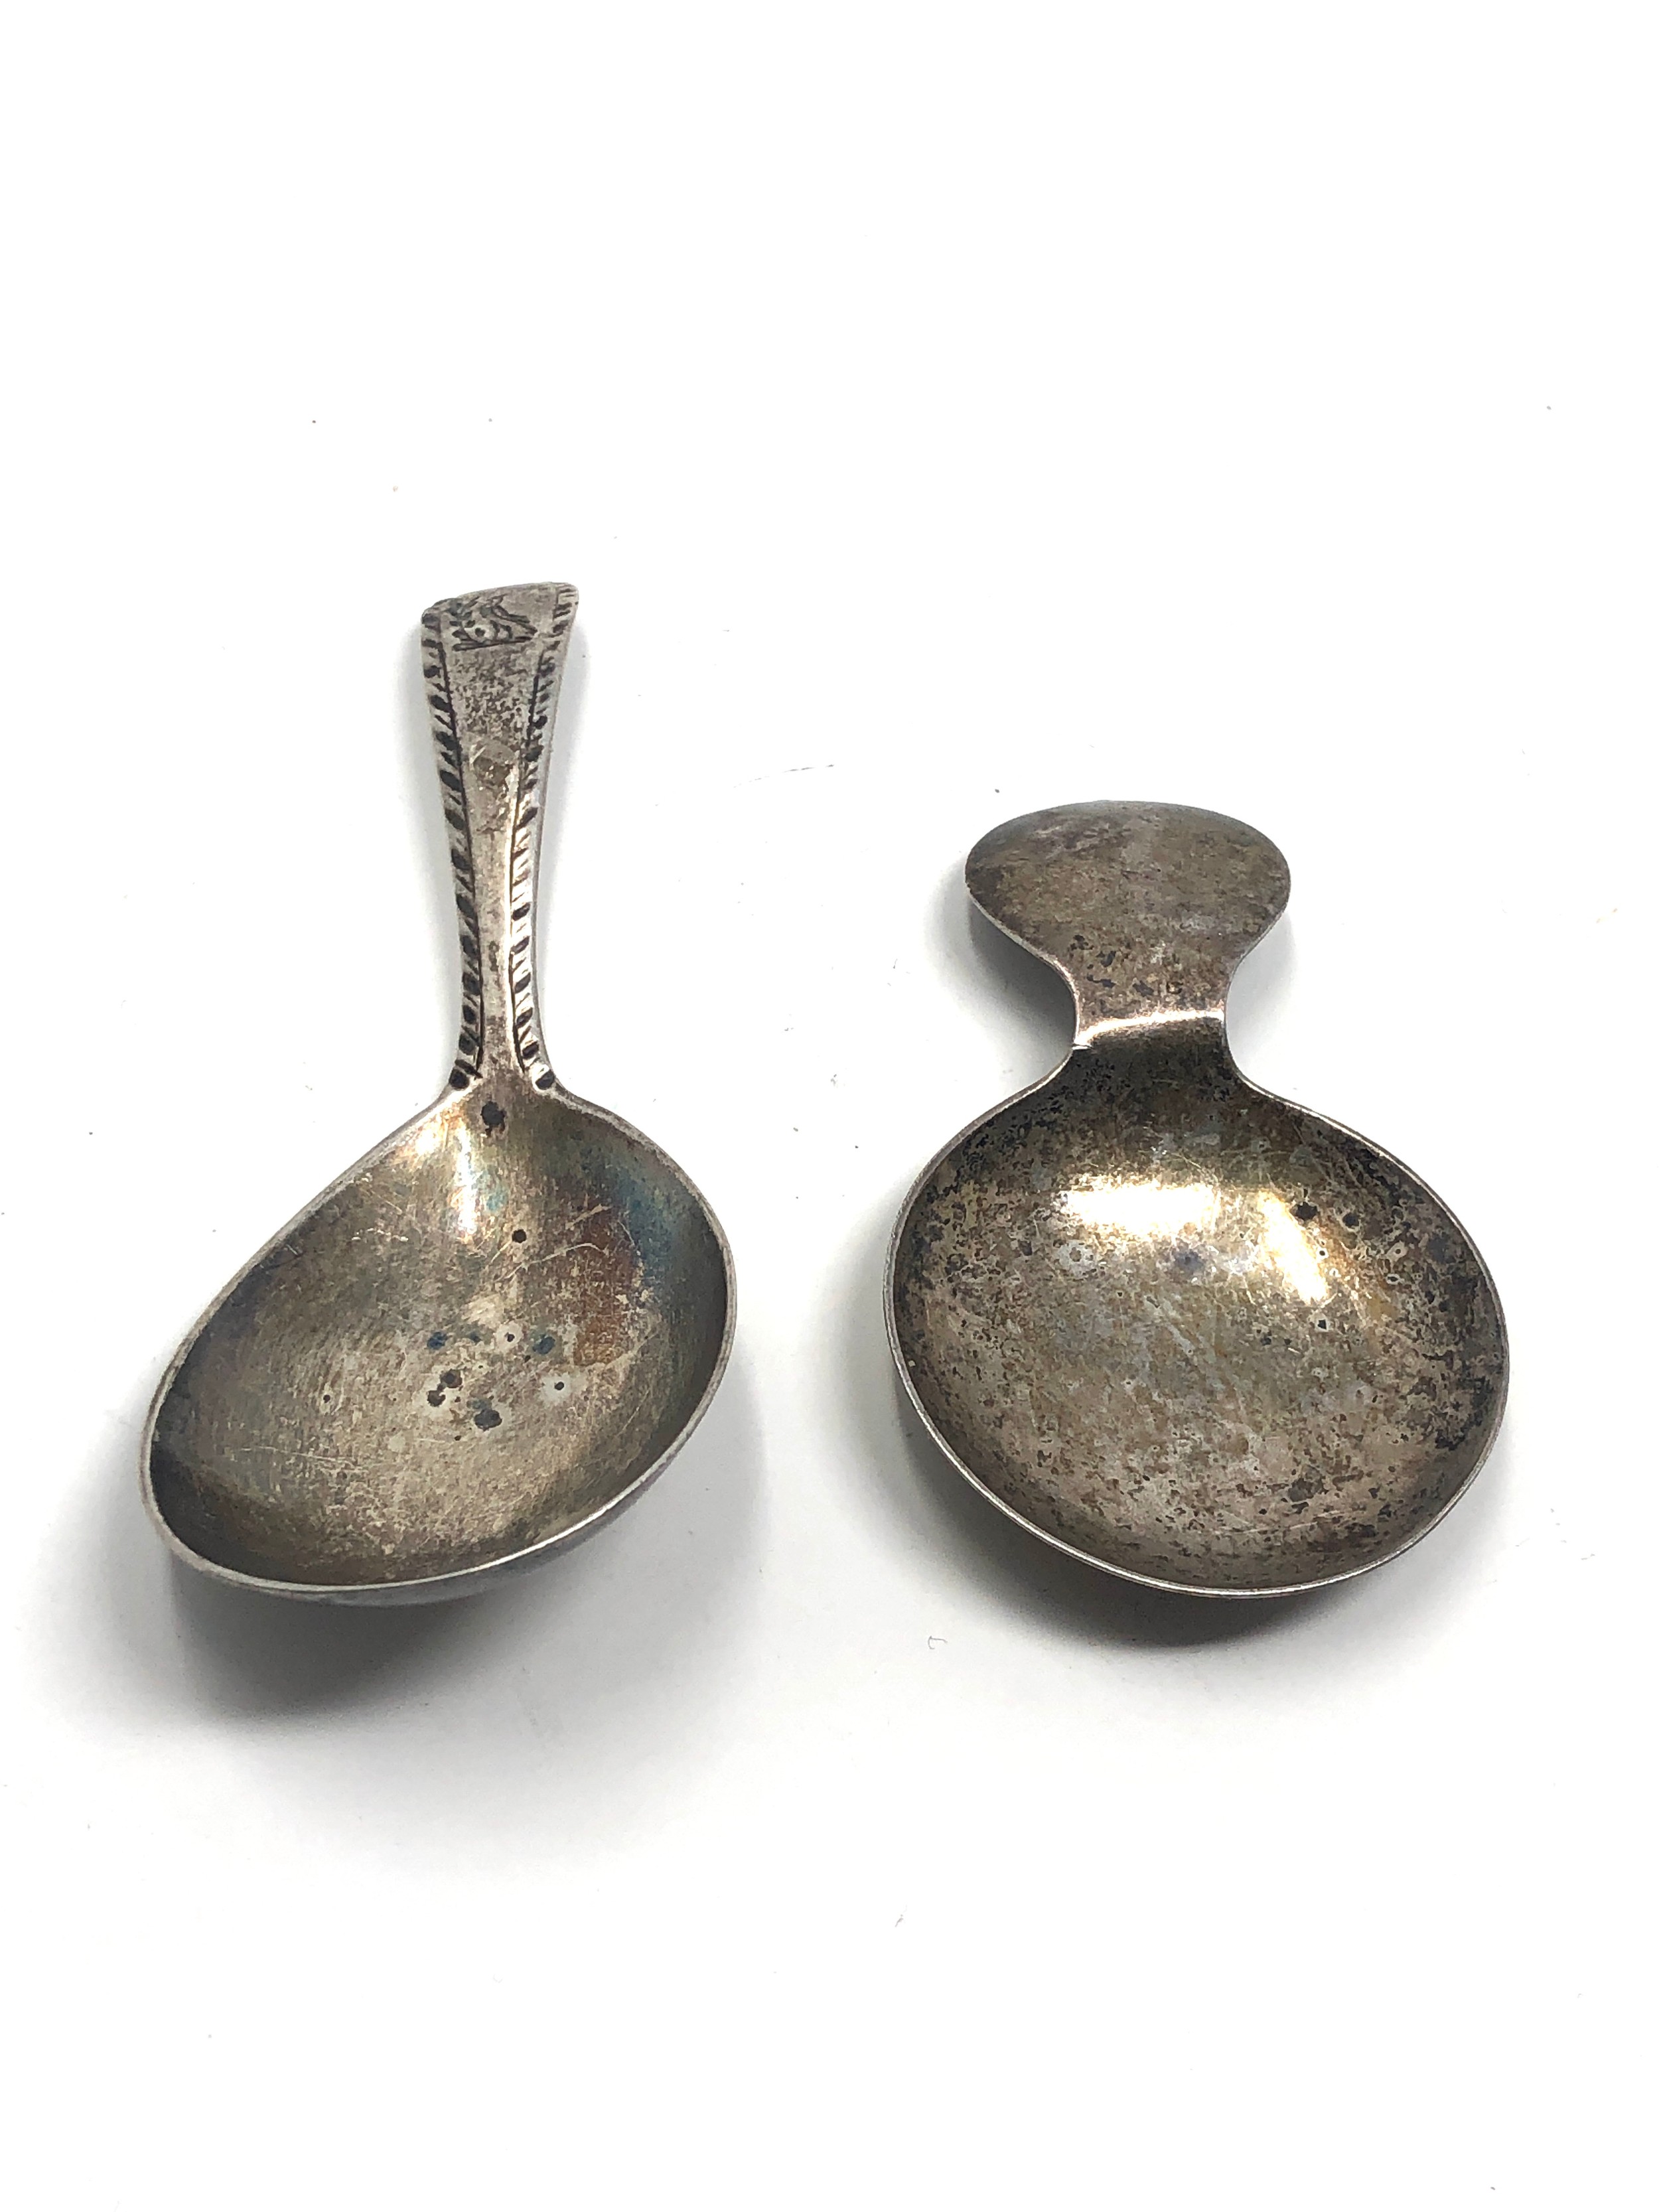 2 antique silver tea caddy spoons - Image 2 of 3